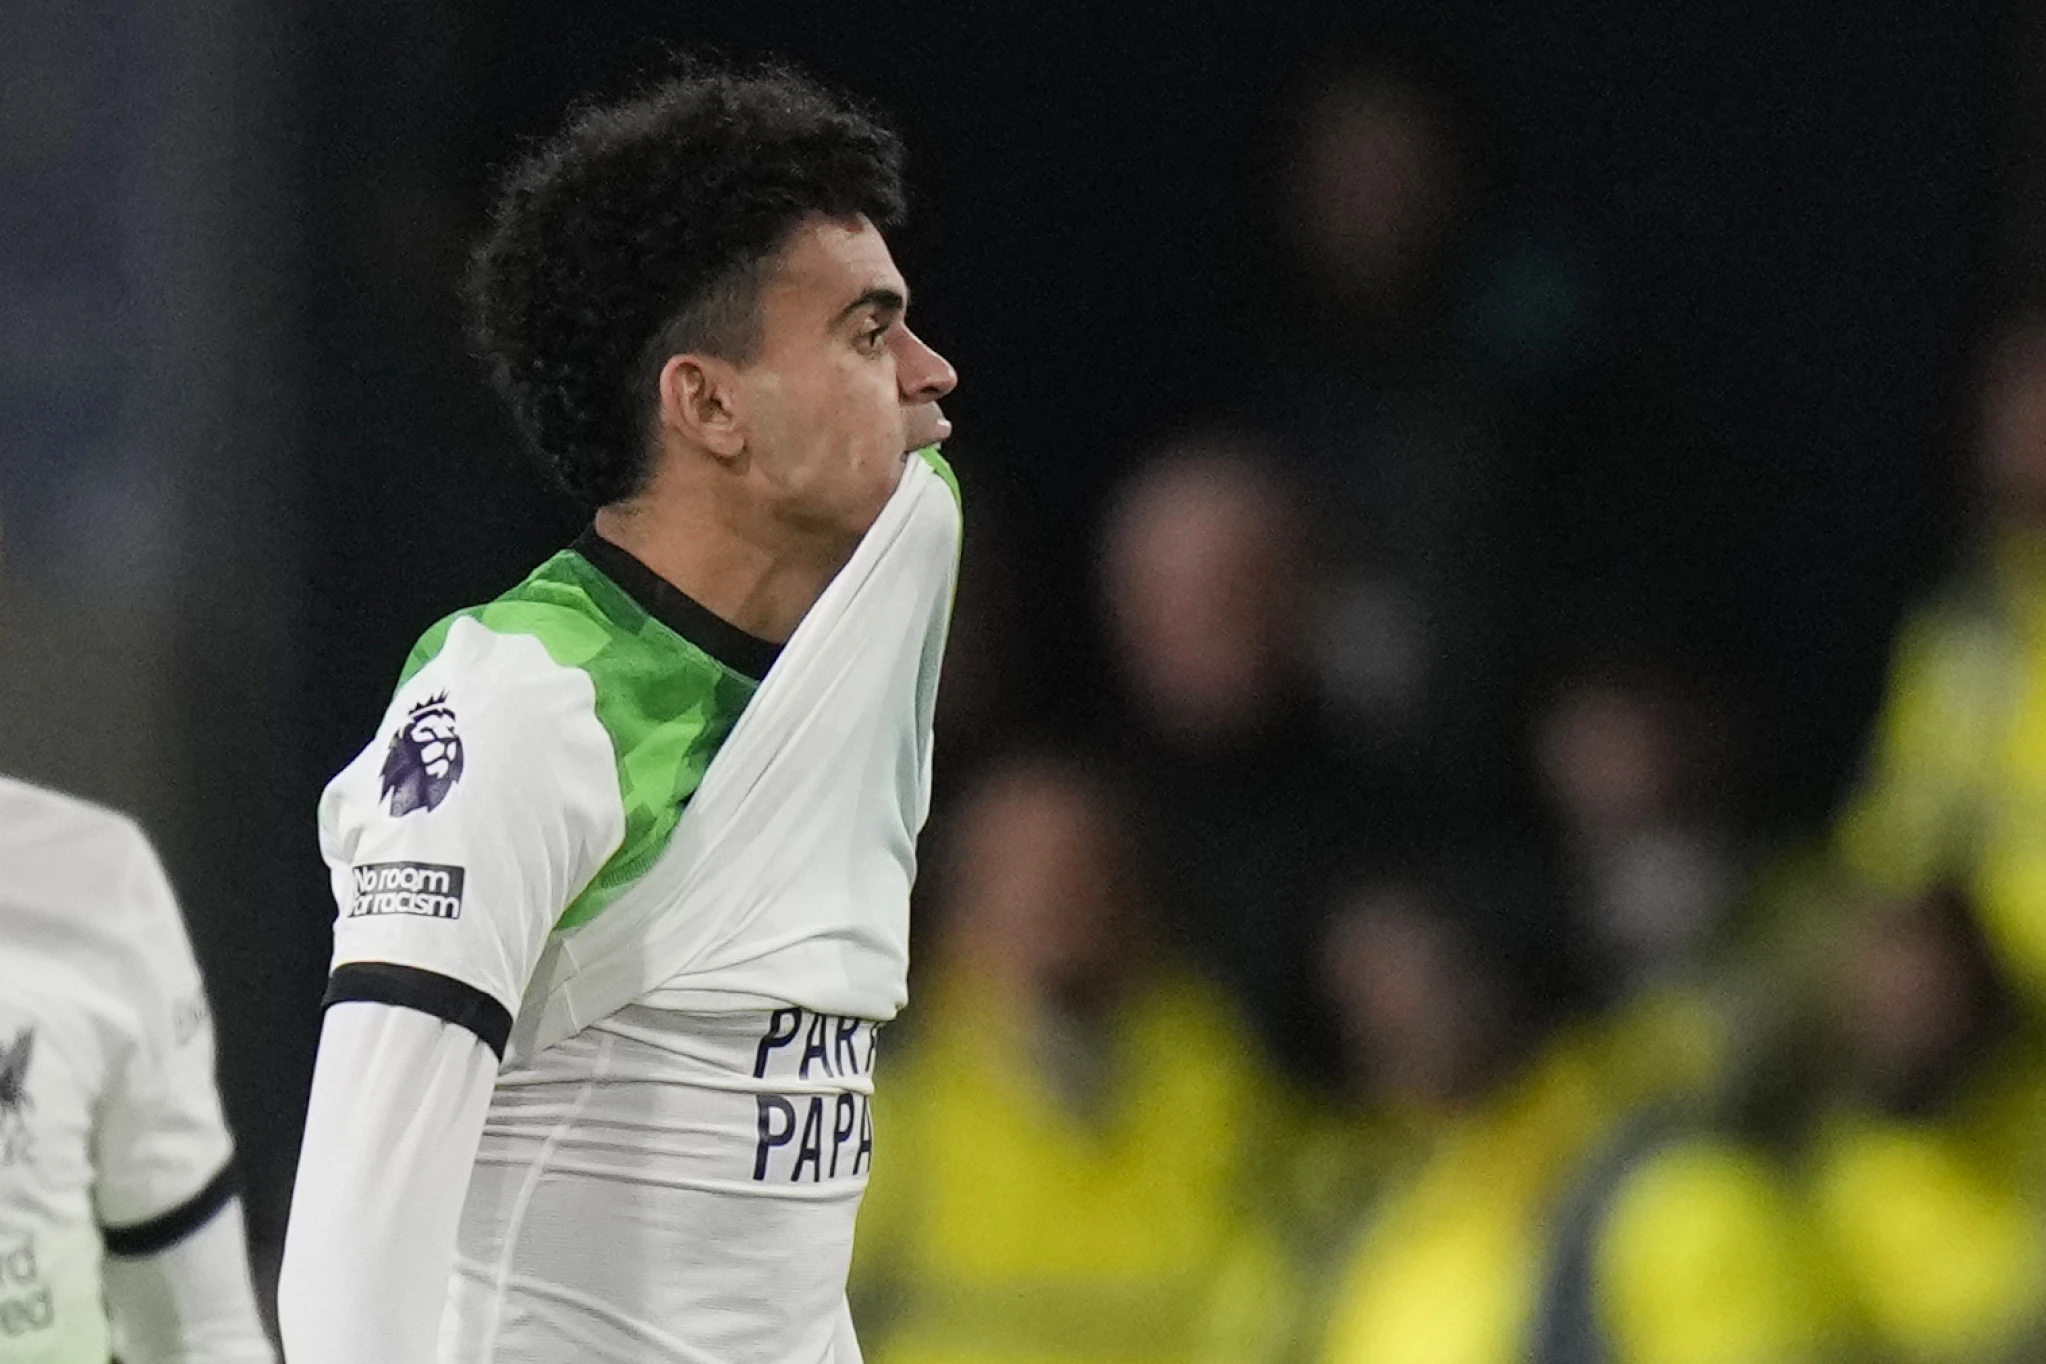 Liverpool forward Luiz Diaz scores an emotional equaliser, sends message for his kidnapped dad